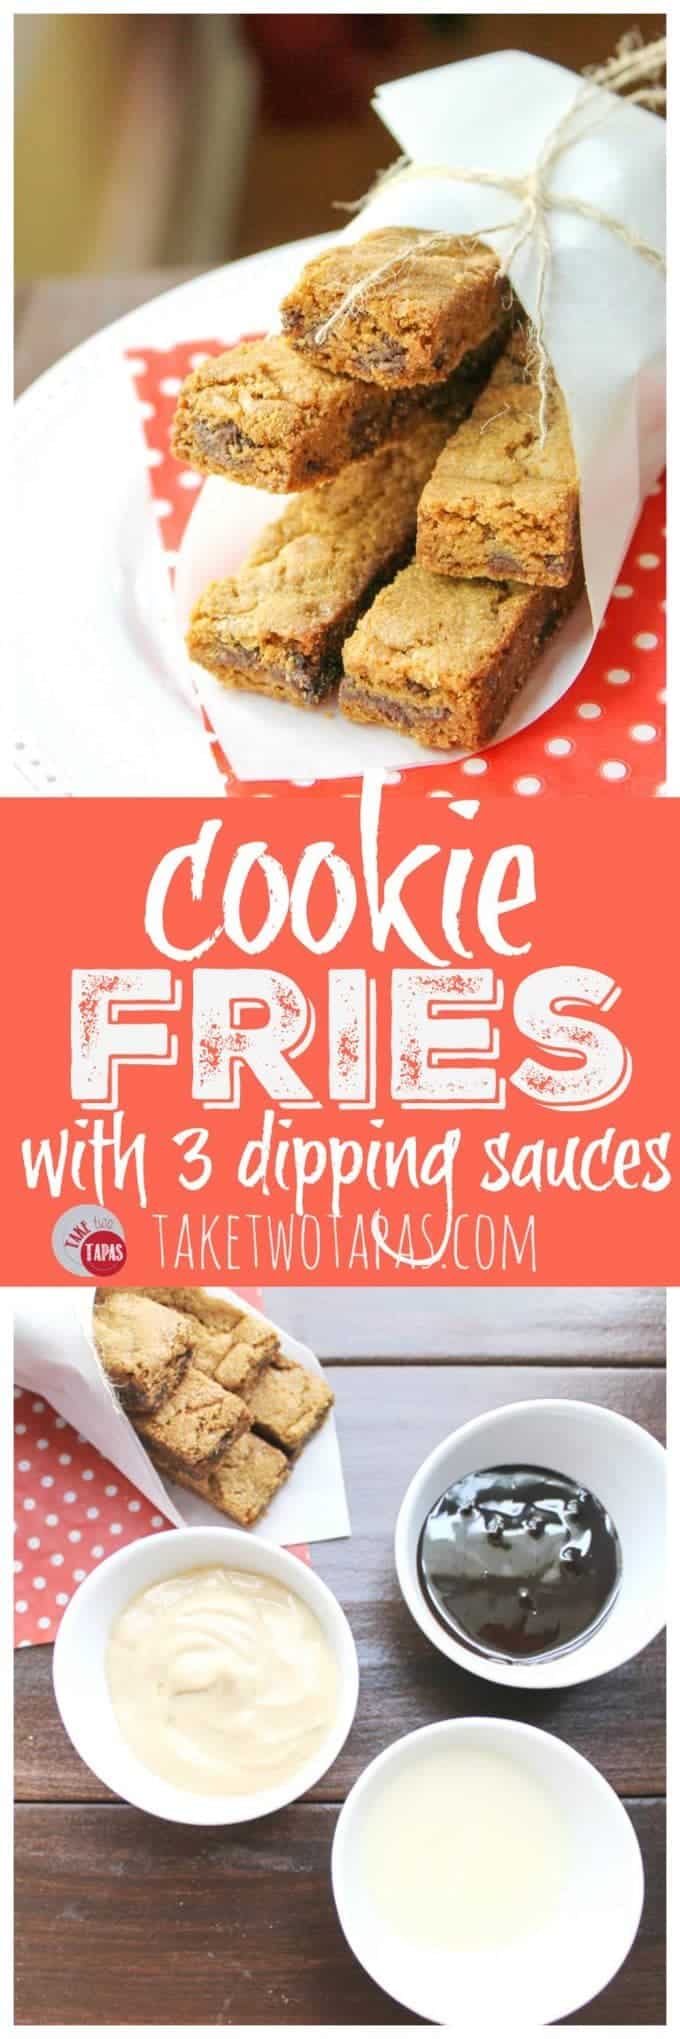 Pinterest collage image with text "Cookie Fries with three dipping sauces."